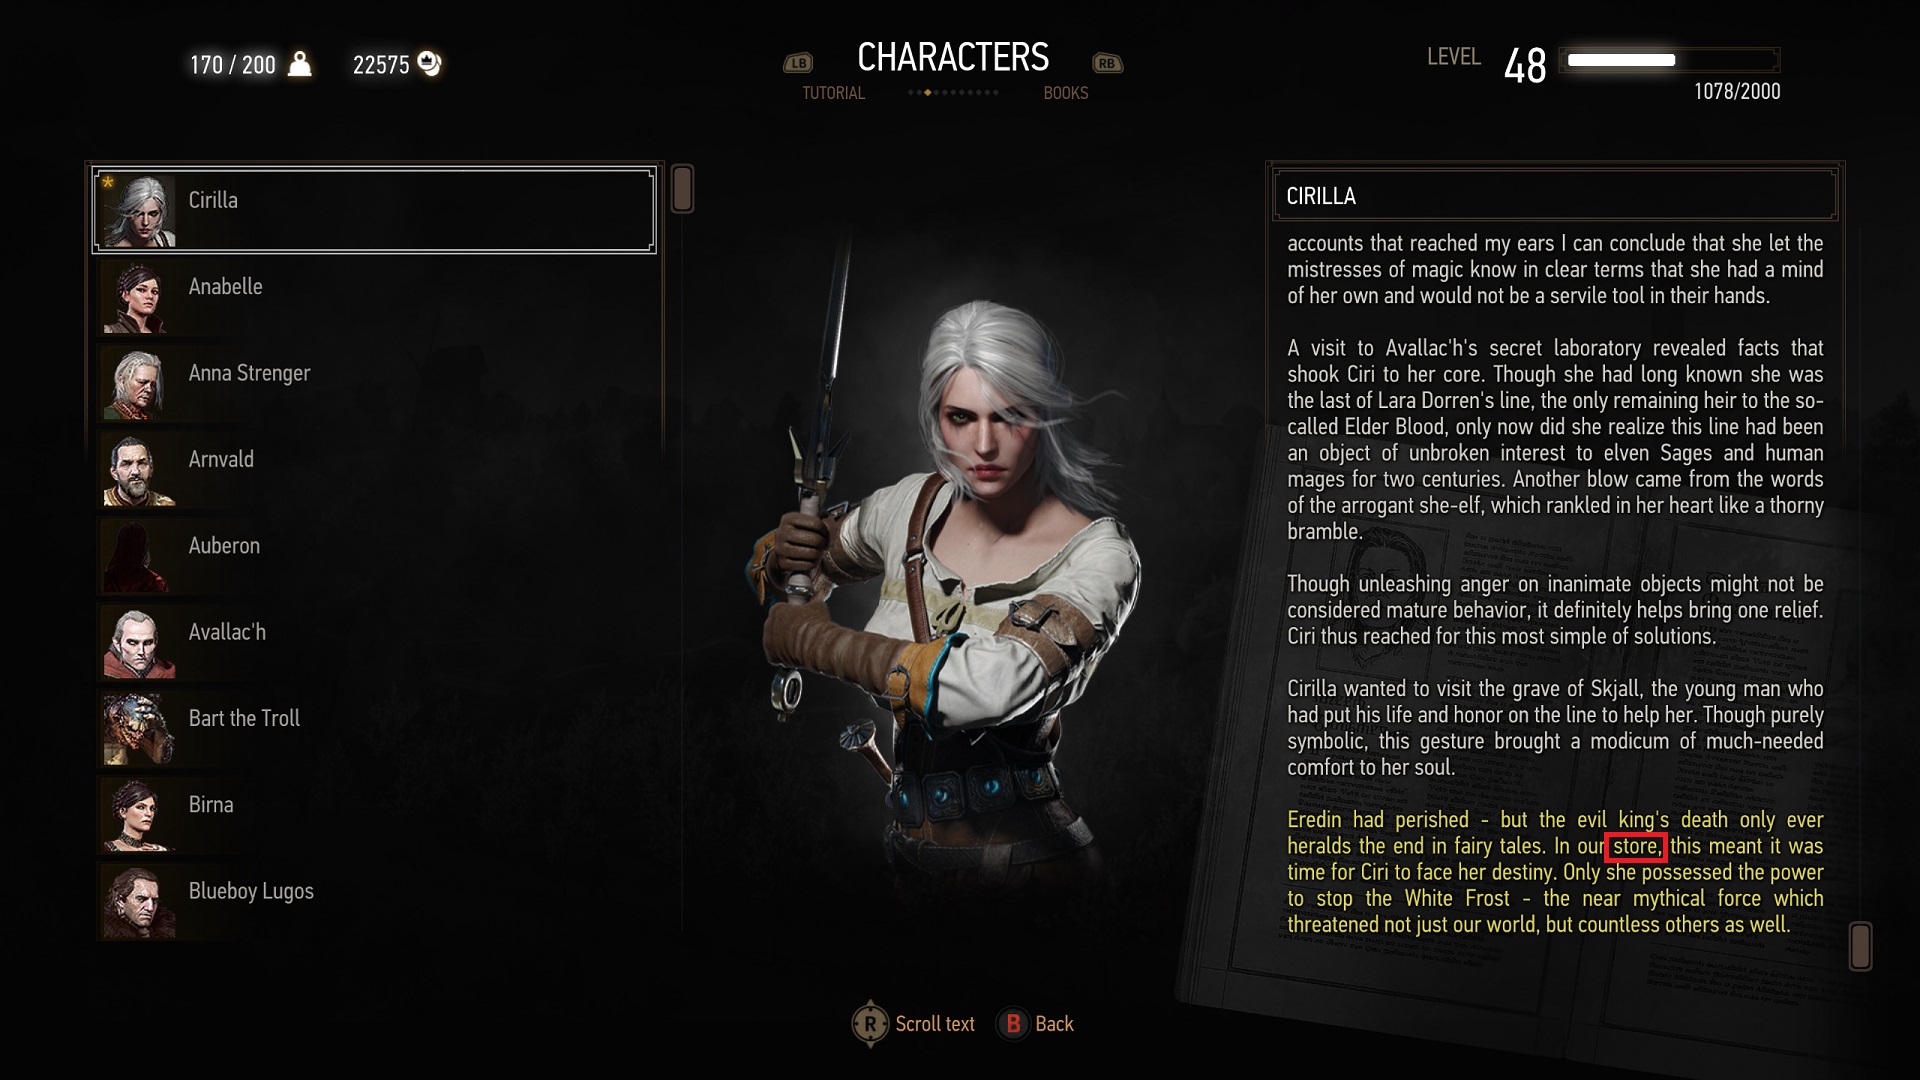 Witcher 3 modder fixes the game's grammer and speling